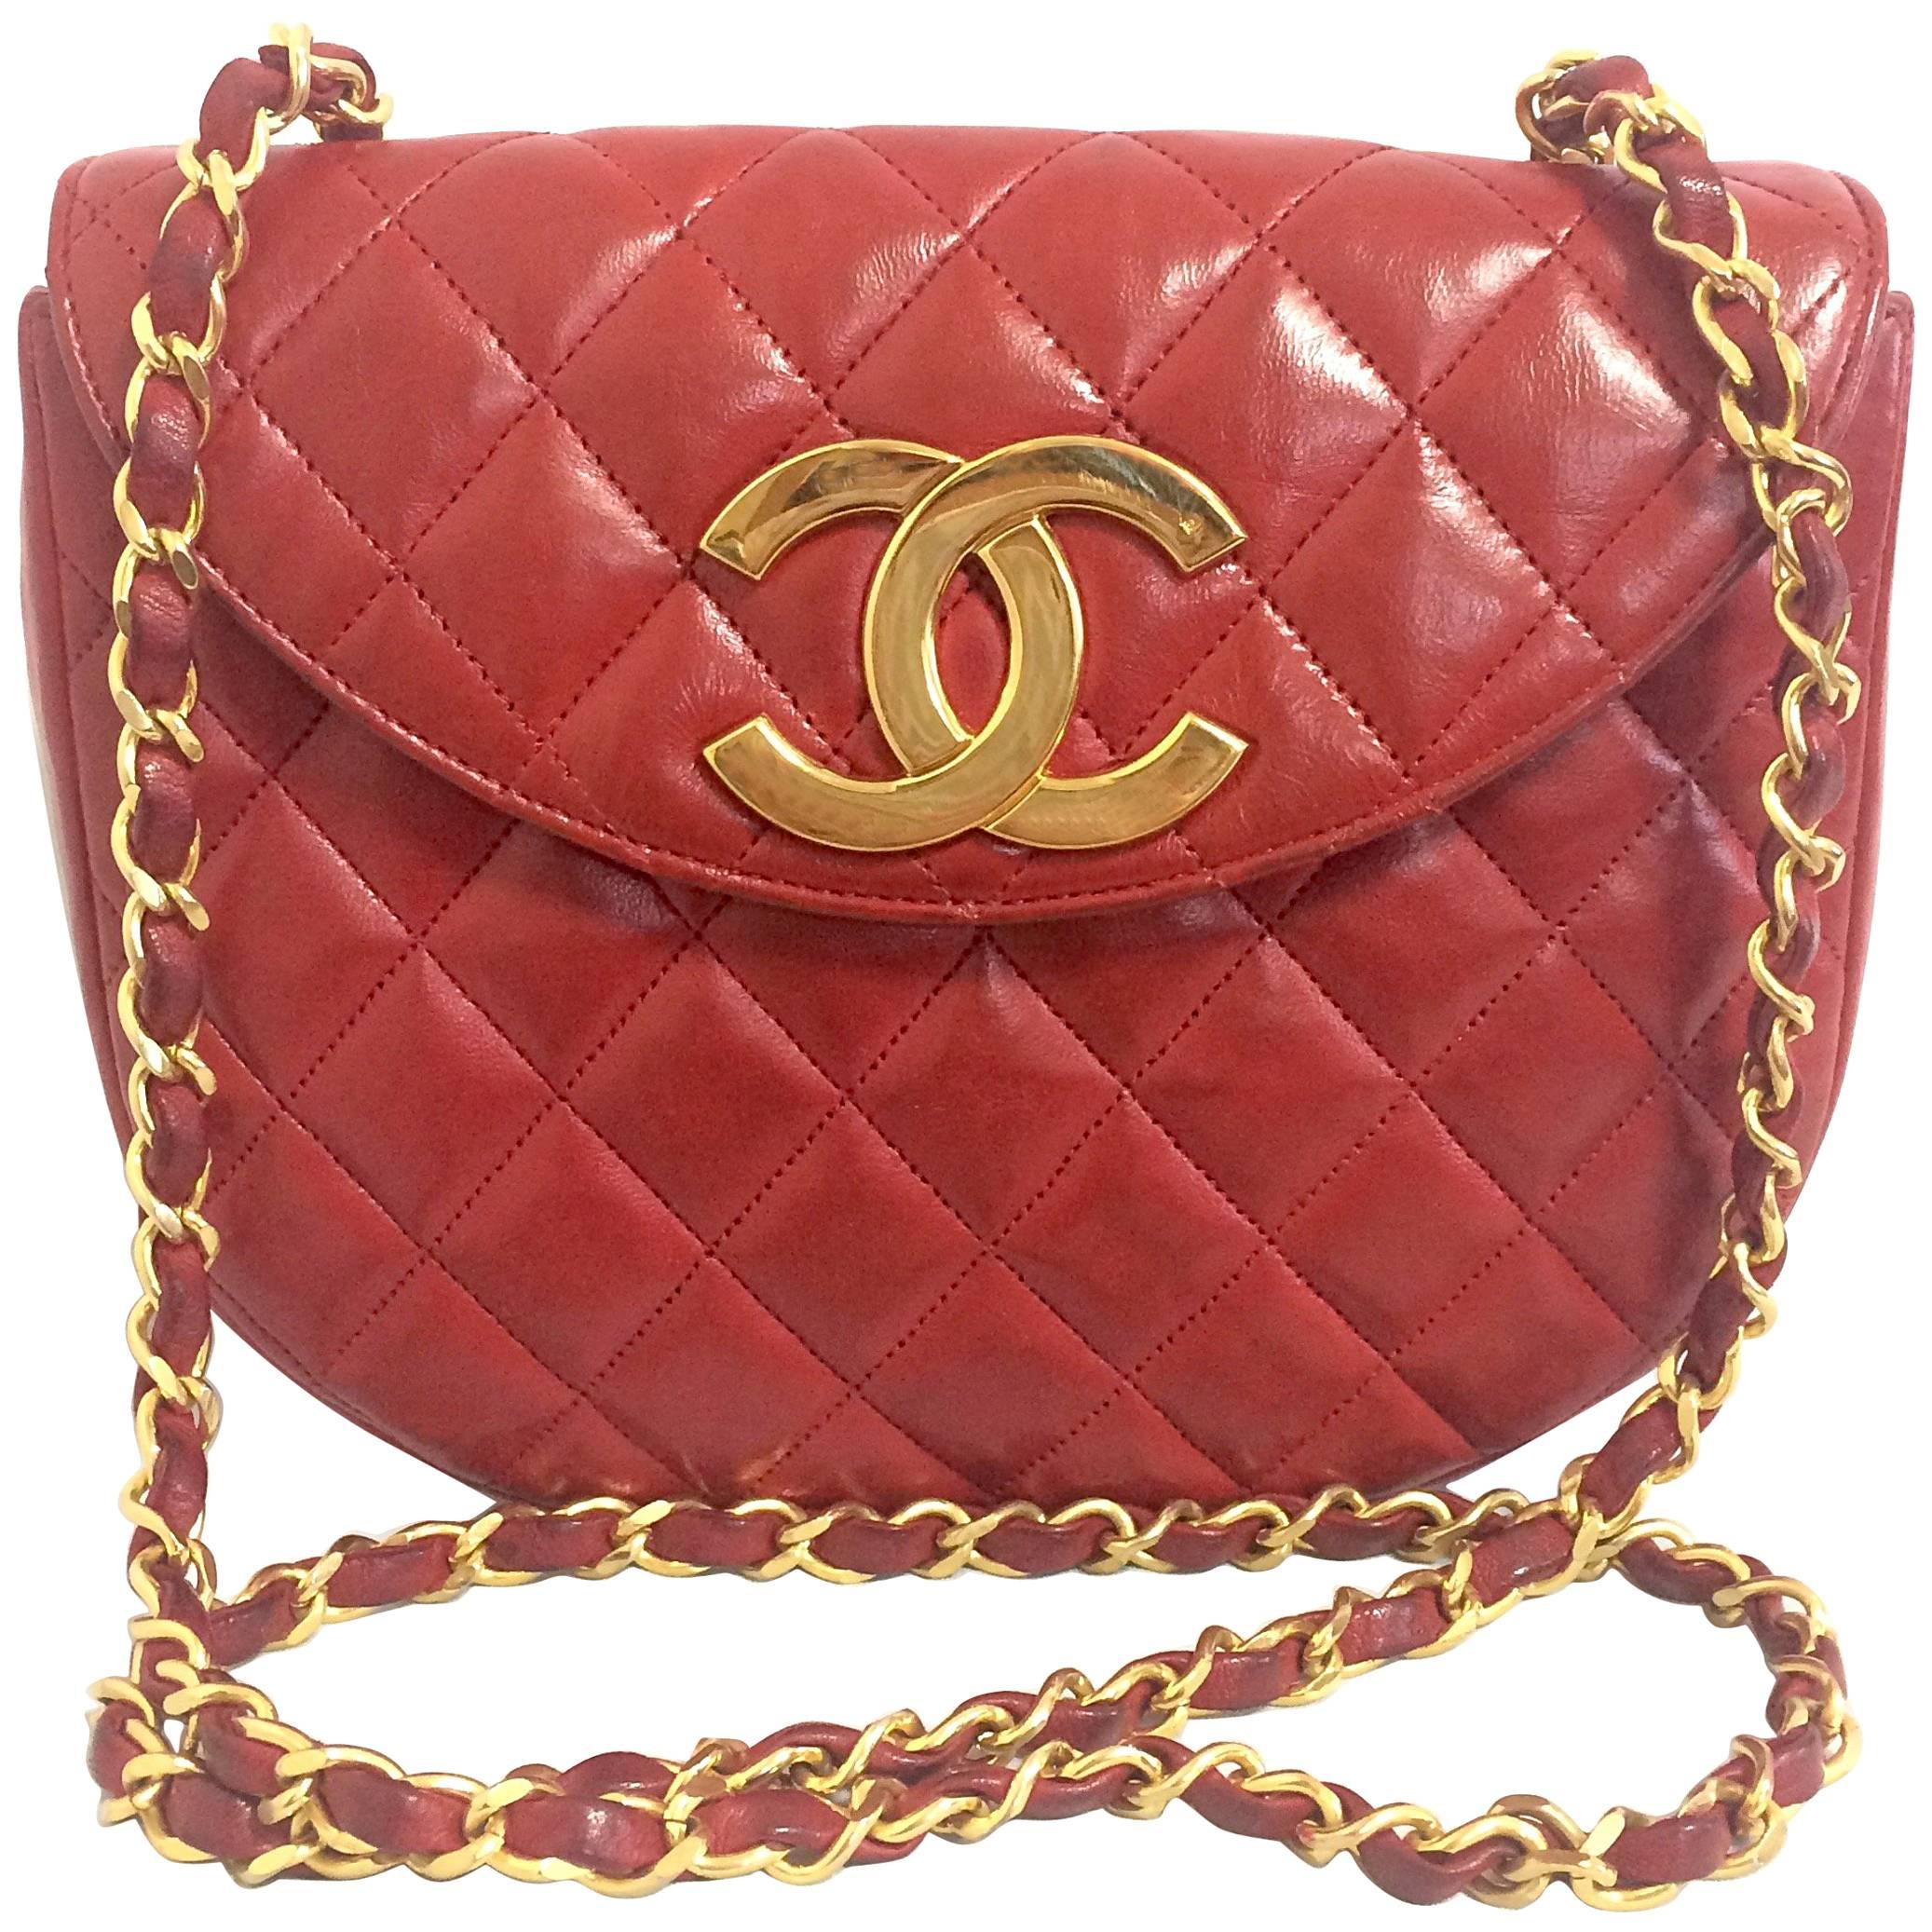 Vintage CHANEL rare red lambskin oval flap 2.55 shoulder bag with large gold CC. For Sale